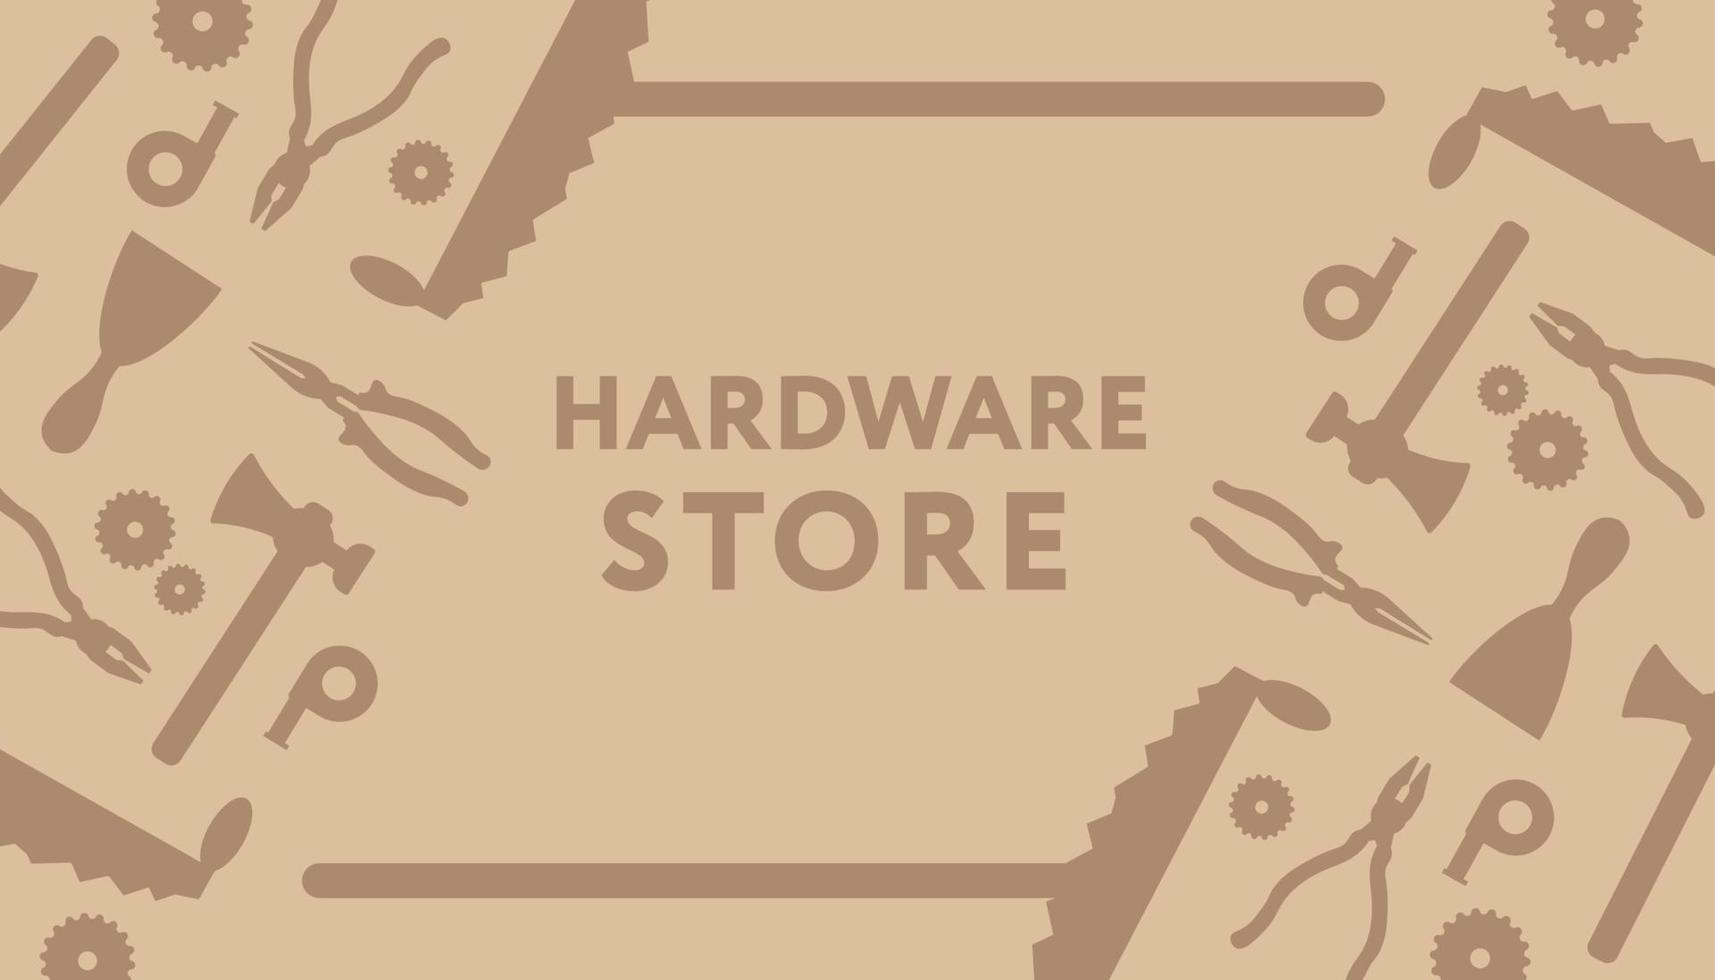 Hardware store, business card or banner design vector